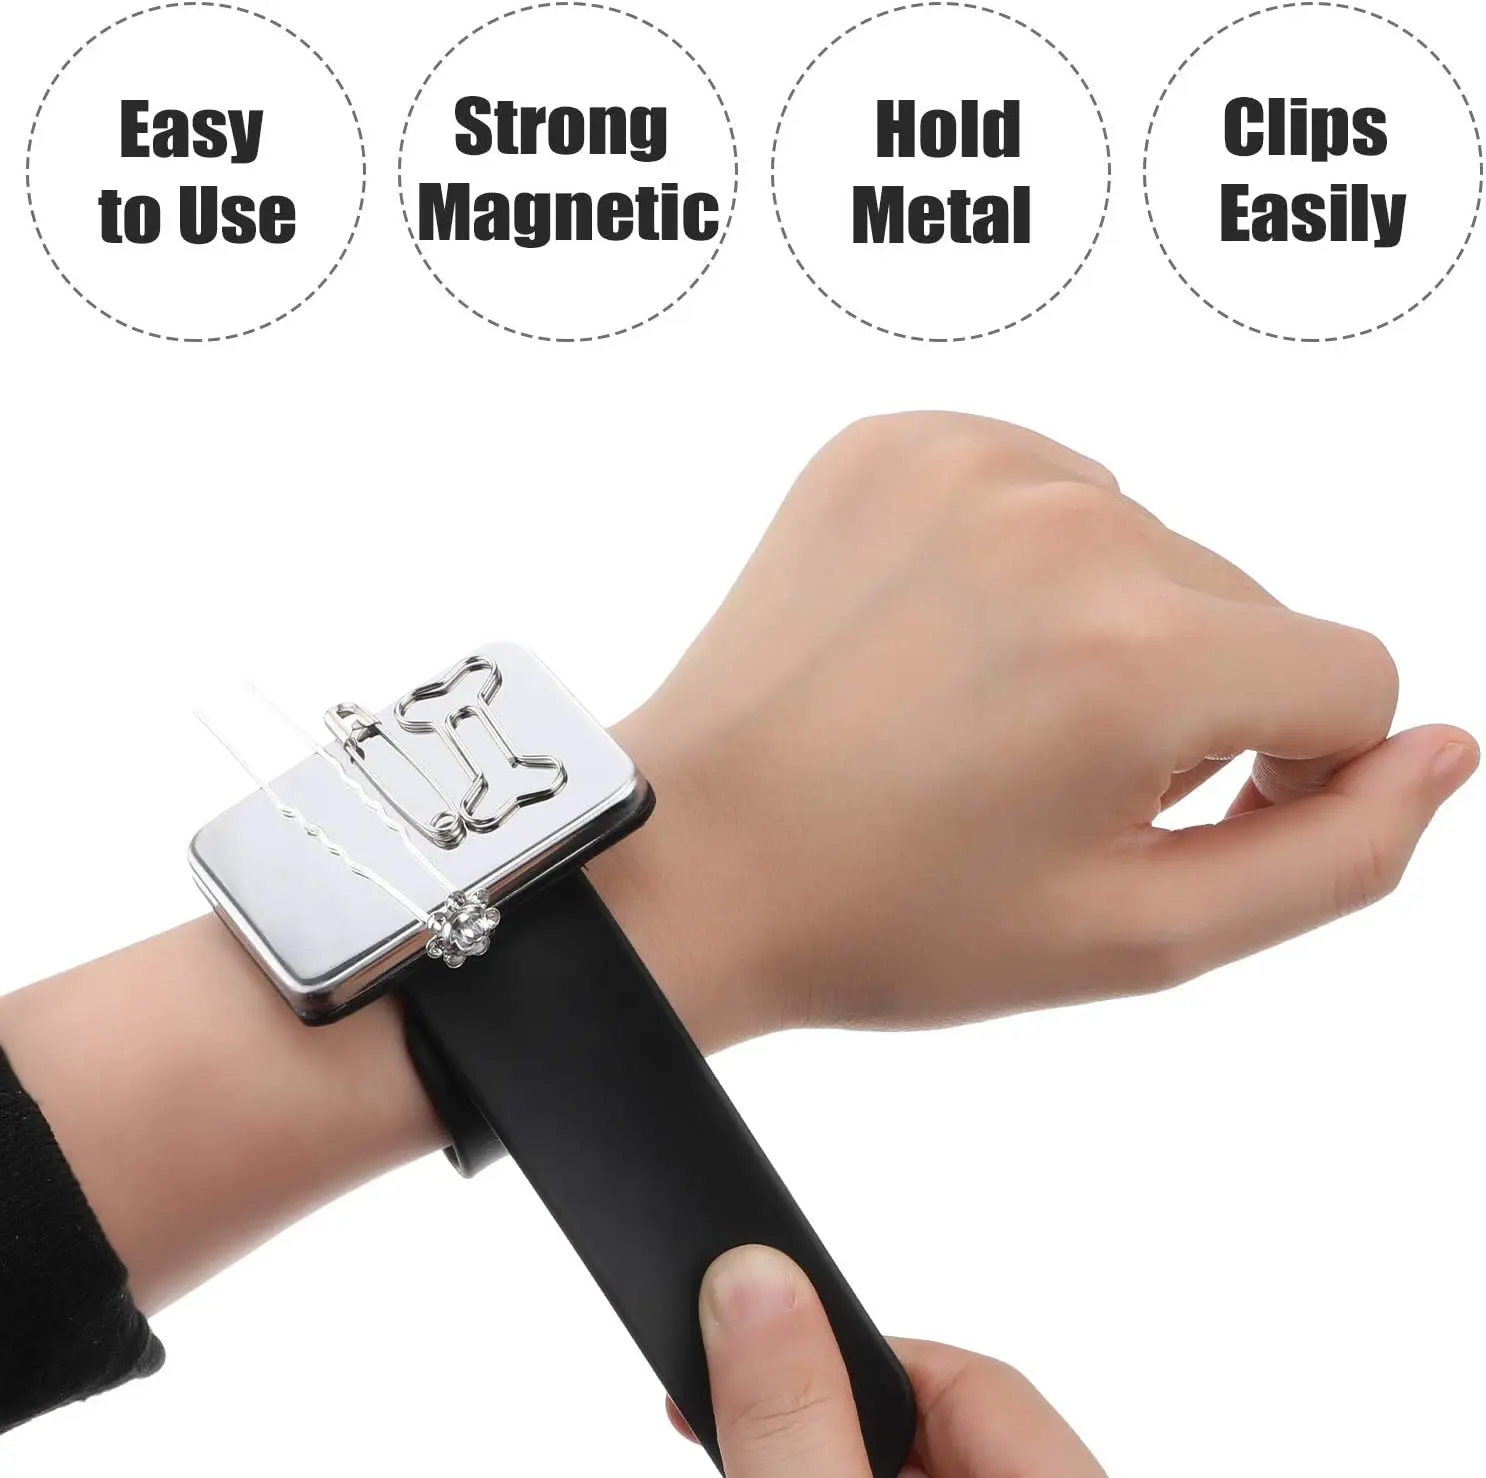 Professional Magnetic Bracelet Wrist Band Strap Salon Hair Accessories Hair Clip Holder Barber Hairdressing Styling Tools for xiaomi mi band 5 6 dragon vein agate beads bracelet watch band replacement wrist strap gold